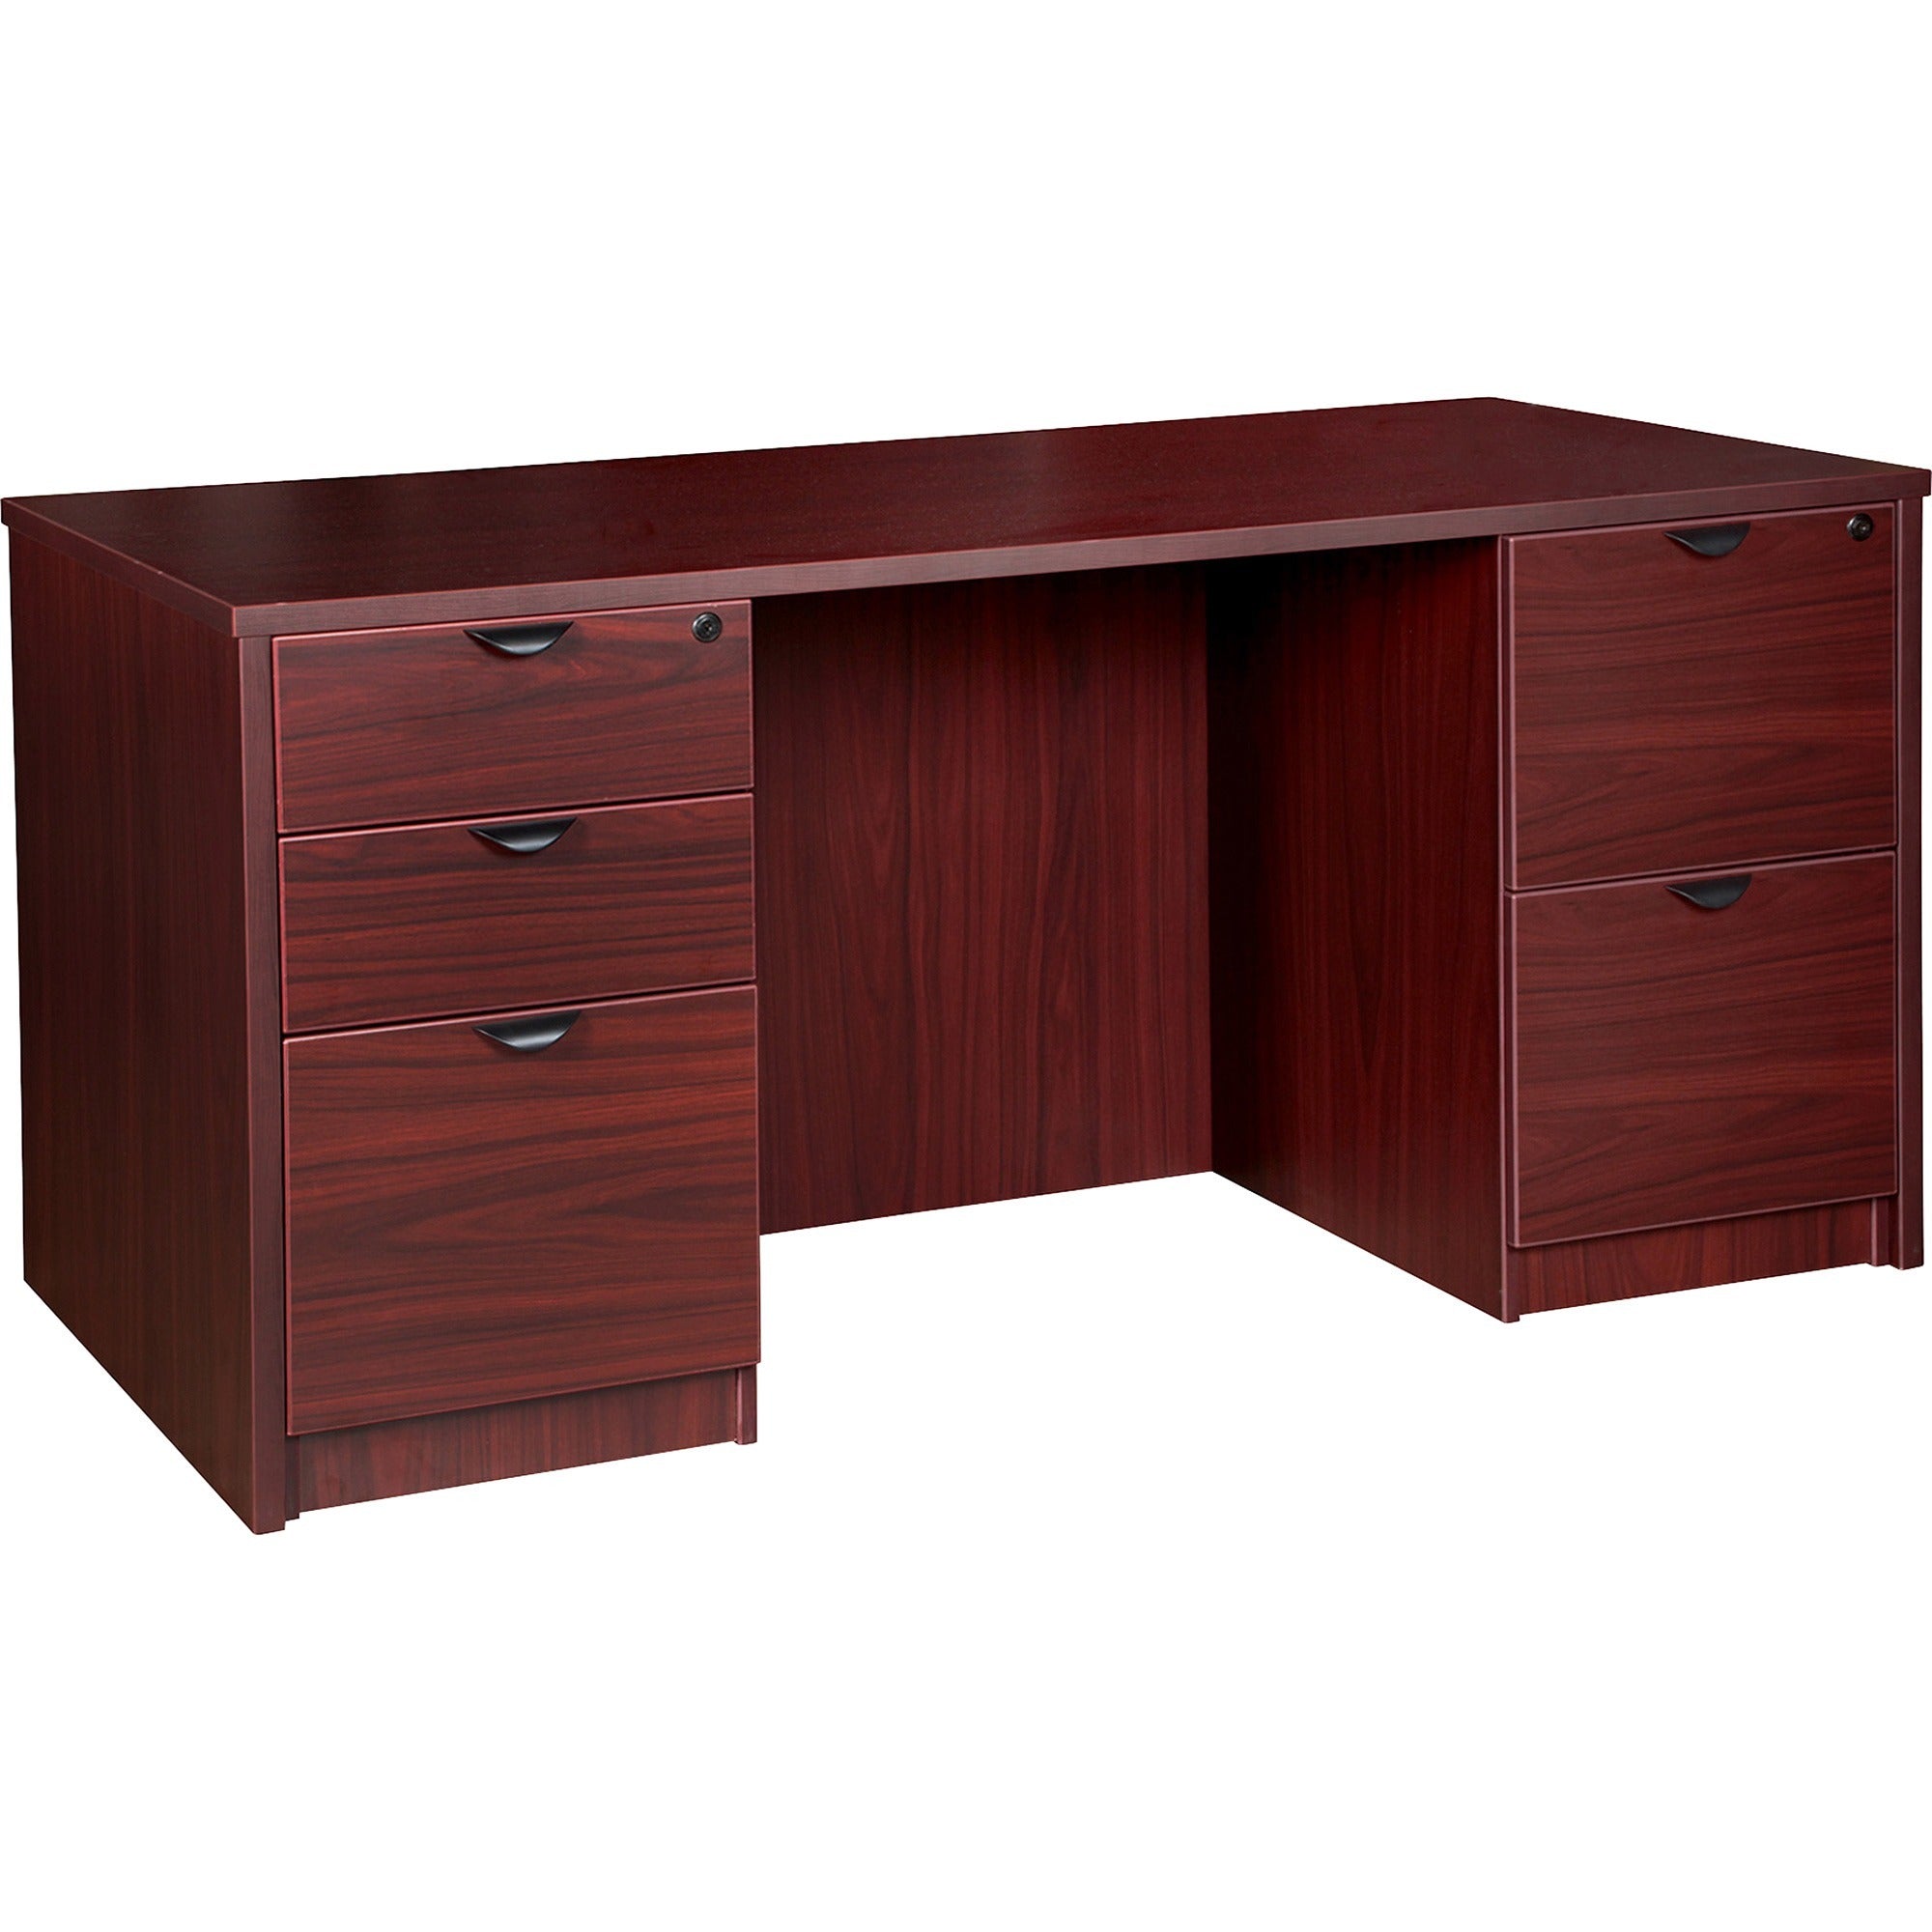 lorell-prominence-20-double-pedestal-desk-1-top-66-x-3029-5-x-file-box-drawers-double-pedestal-band-edge-material-particleboard-finish-mahogany-laminate-thermofused-melamine-tfm_llrpd3066dpmy - 1